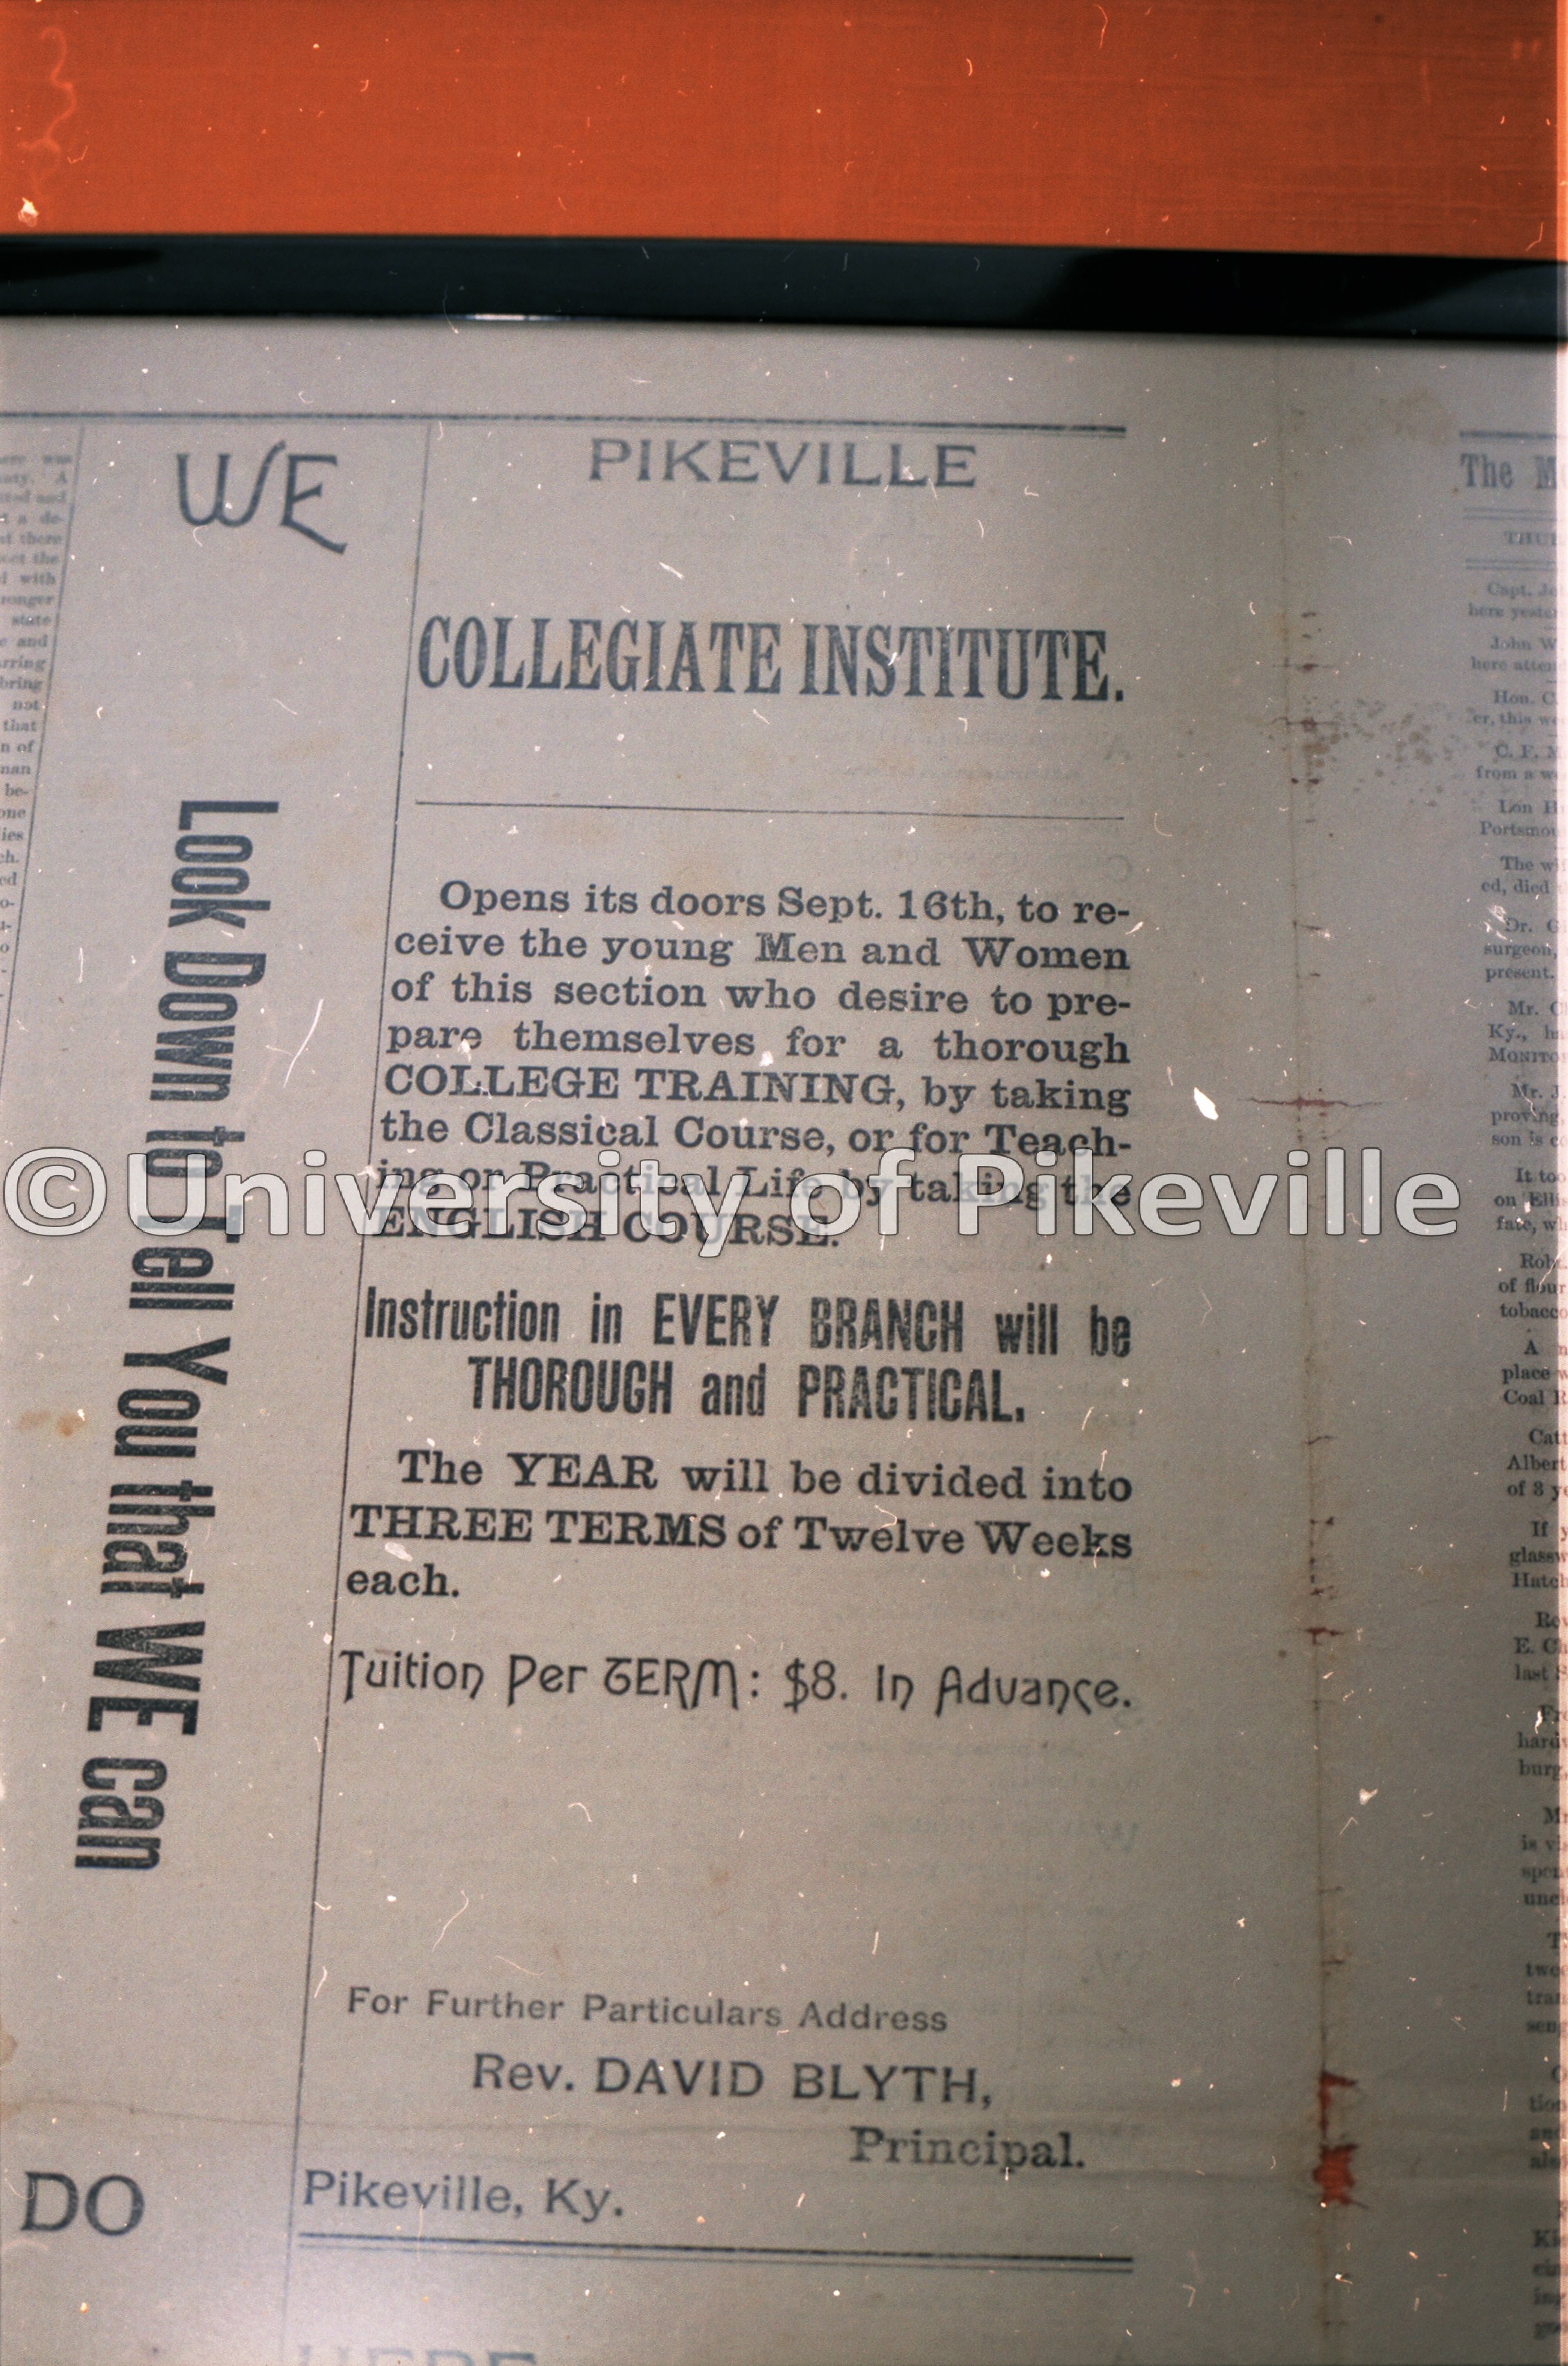 Advertisment for the opening of Pikeville Colligiate Institute